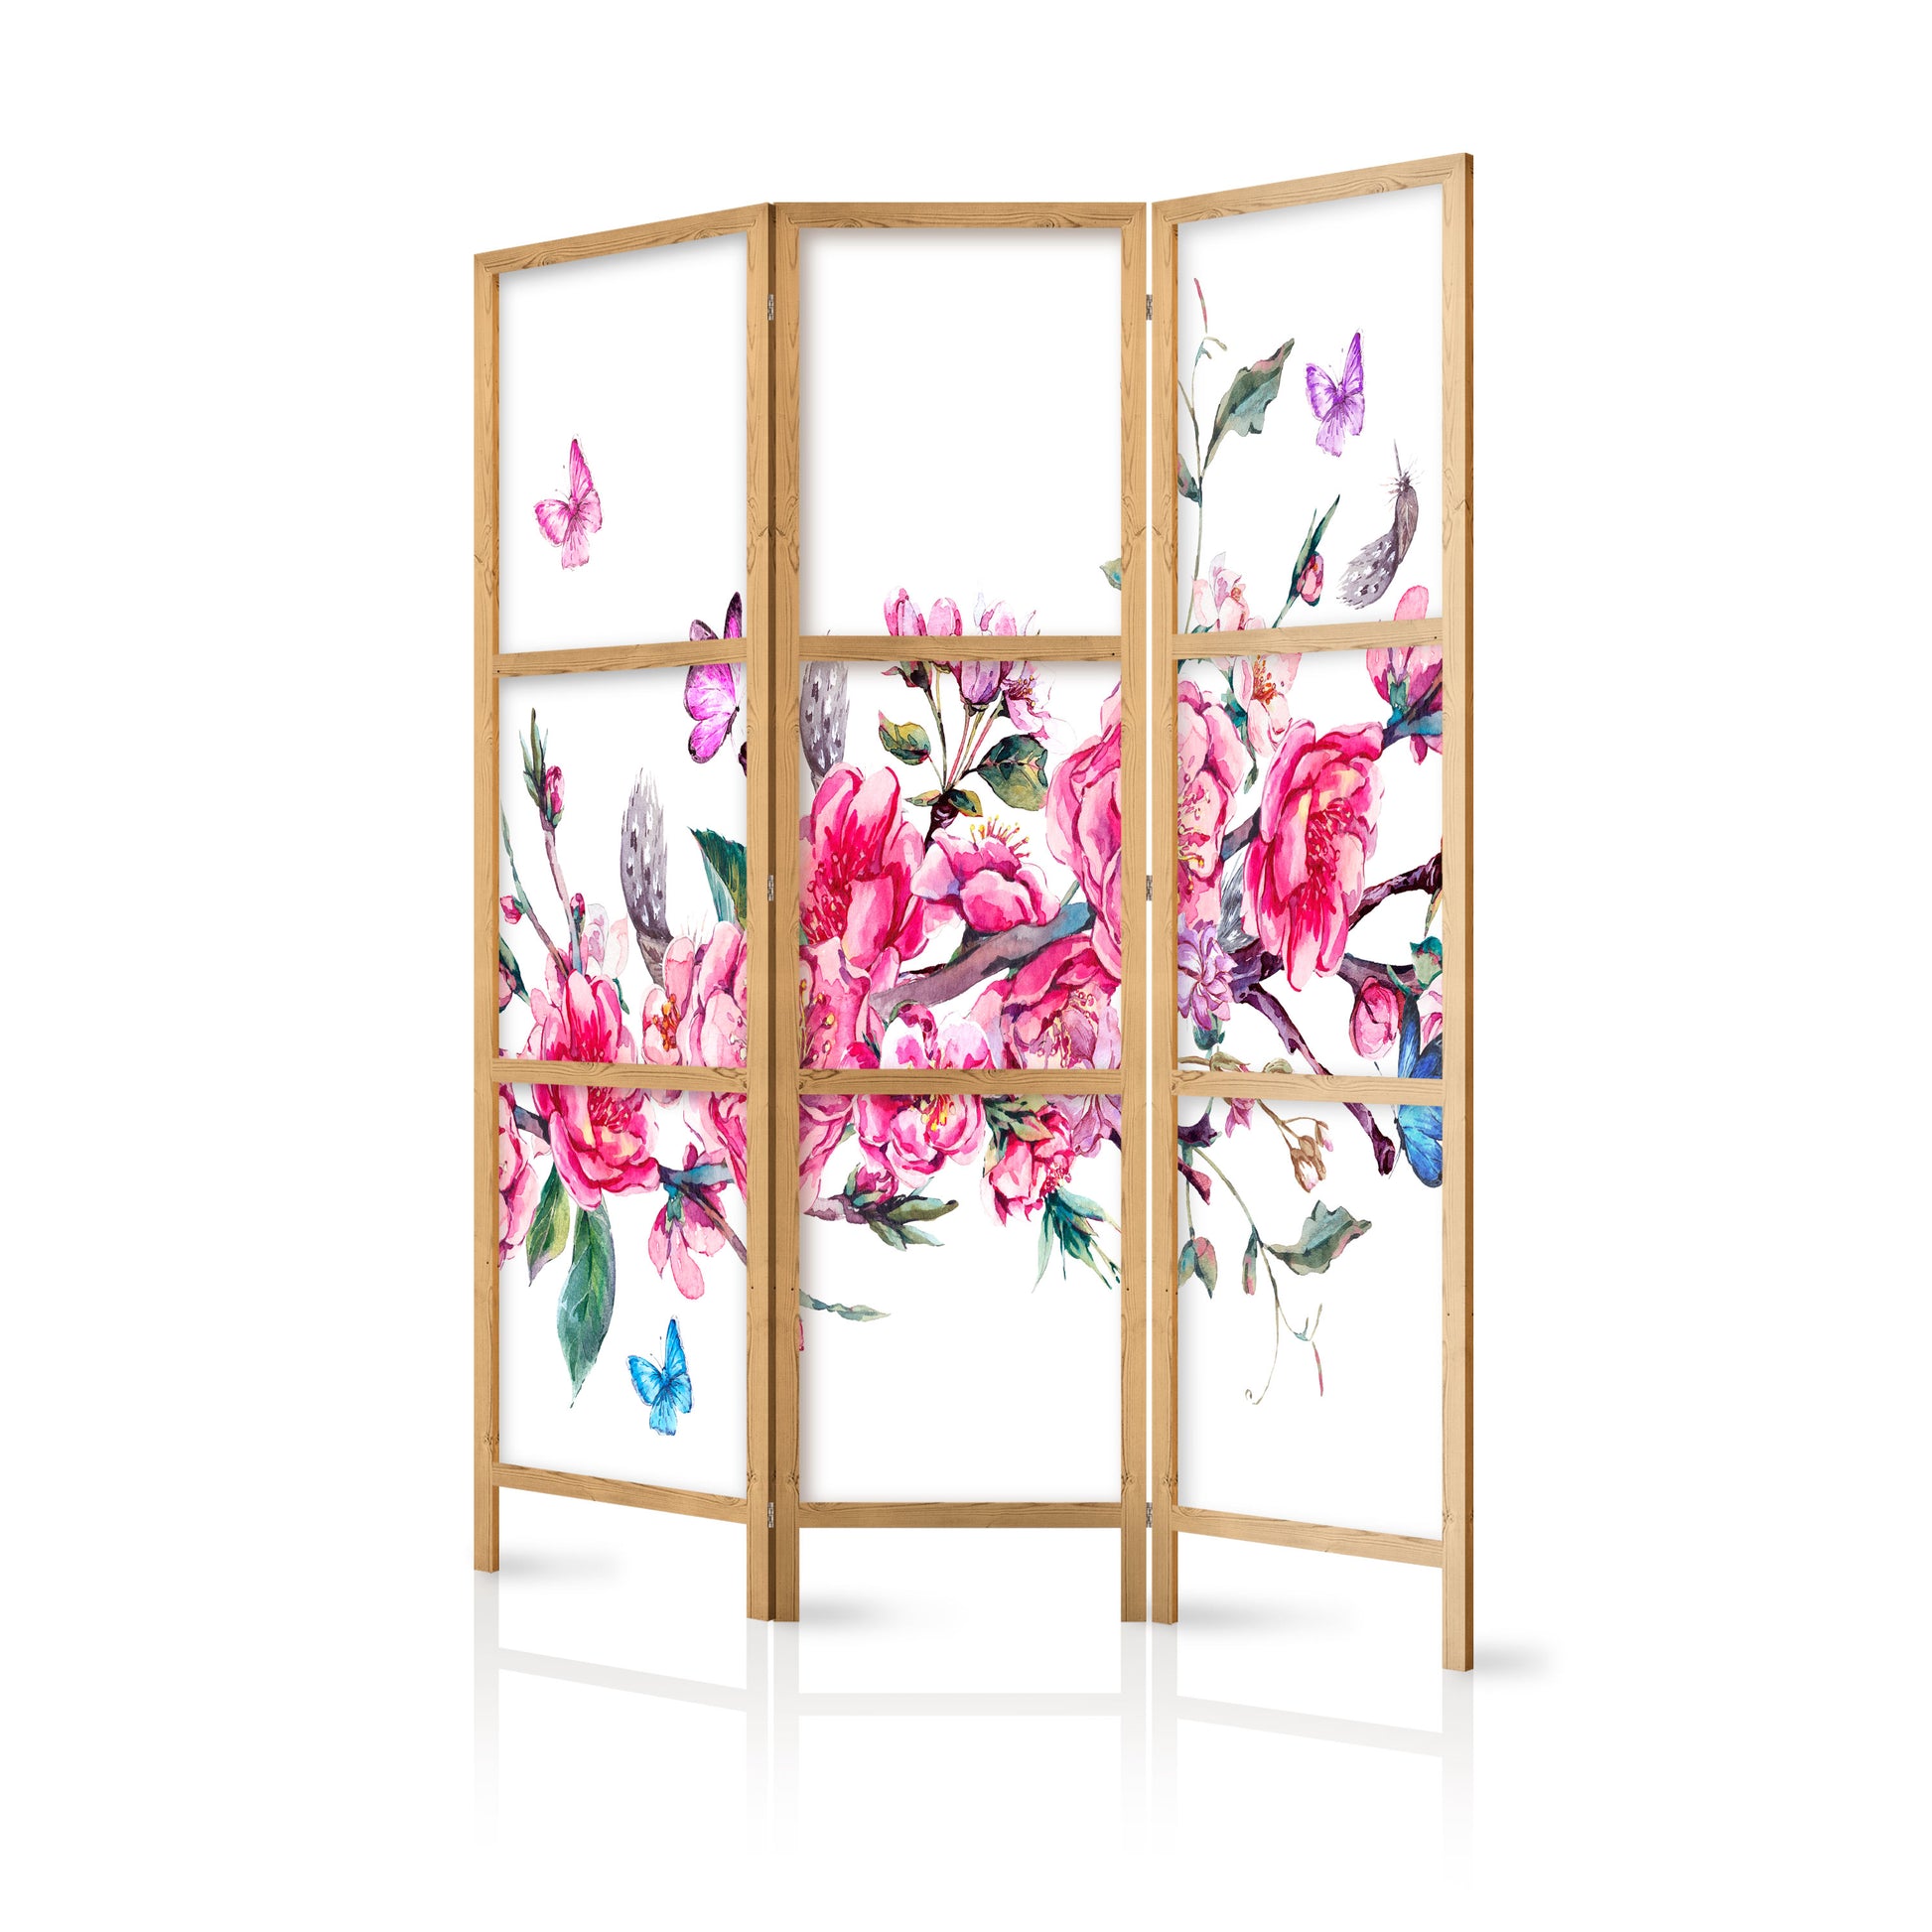 Shoji room Divider - Japanese Room Divider - Style: Flowers and Butterflies - ArtfulPrivacy